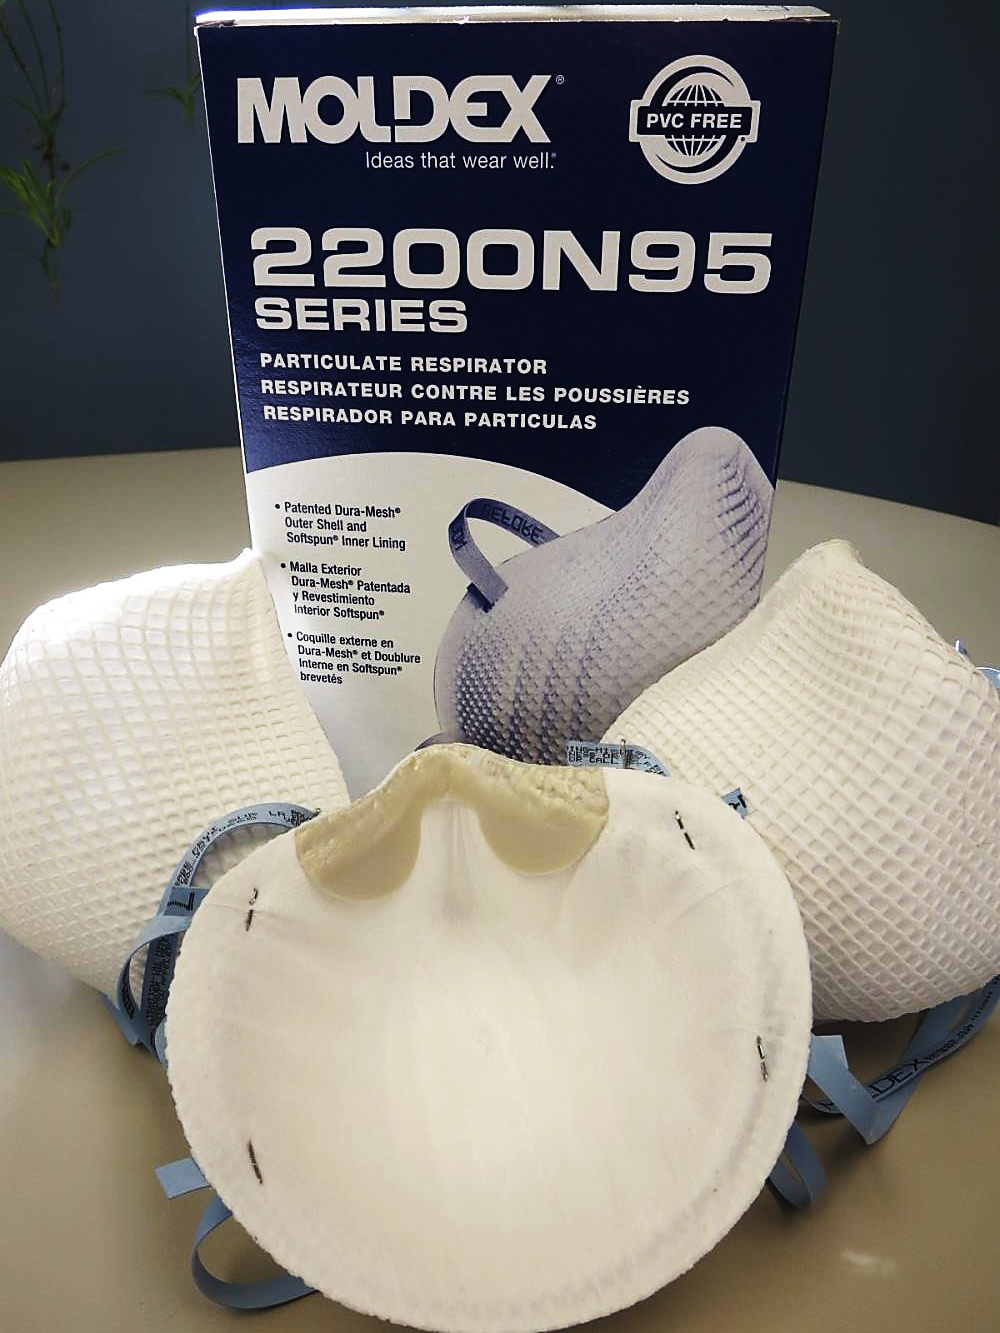 2200 Moldex® 2200 N95 NIOSH Approved Disposable Particulate Respirator - Made in the USA